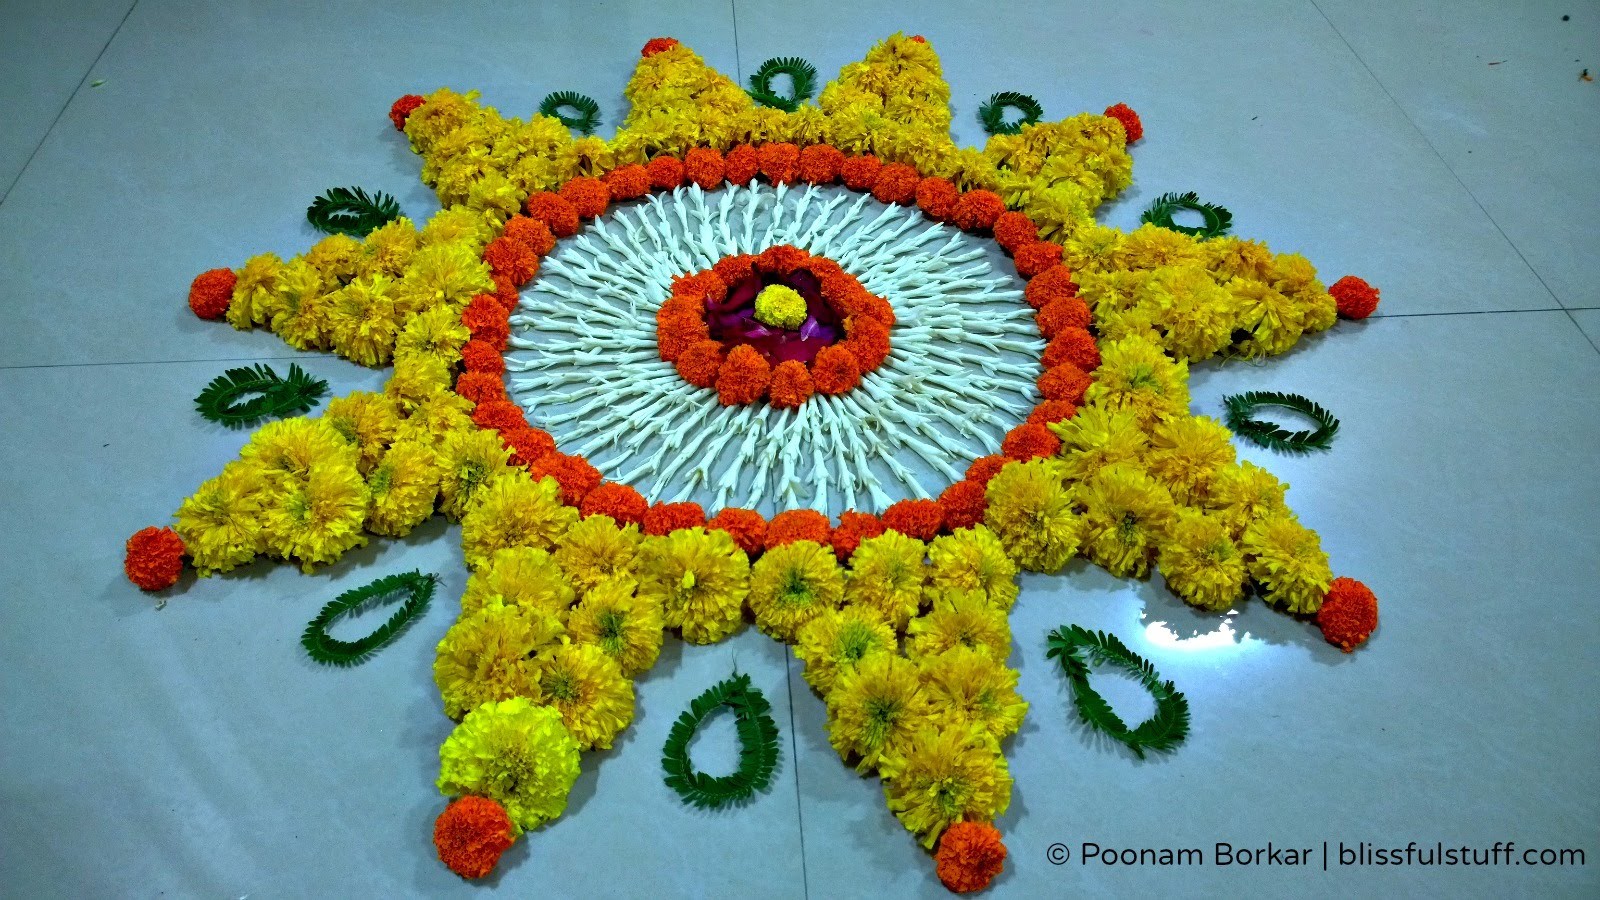 Diwali Special - Rangoli Design with marigold flowers, How to make rangoli with flowers - I